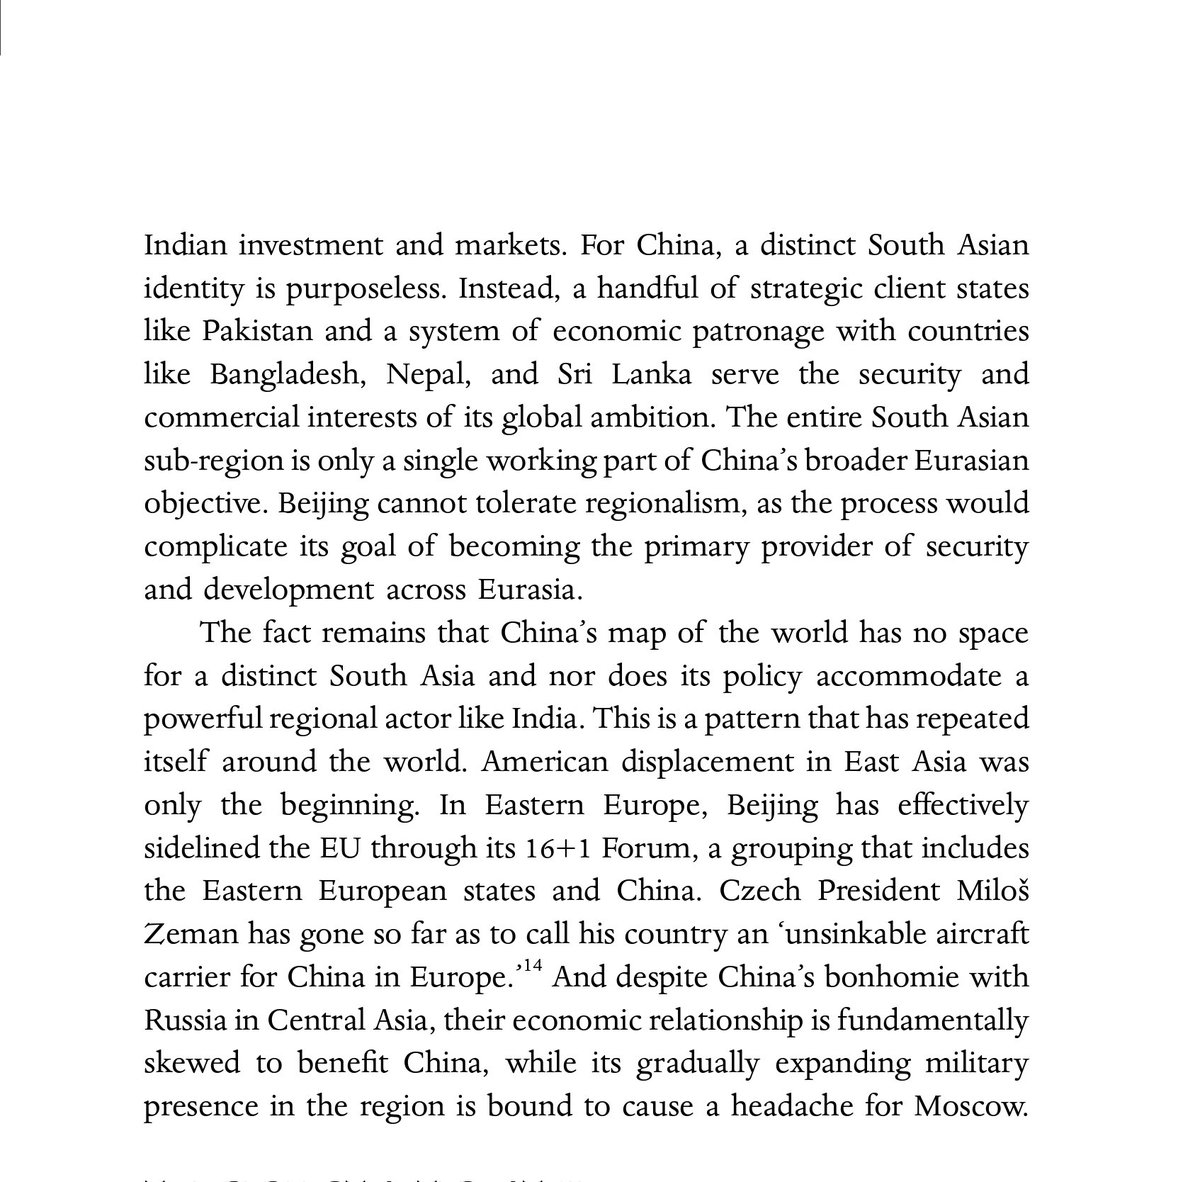 On the region—We have argued that an independent South Asian construct does not serve China’s interests. Beijing would like to subsume these regional configurations into nodes and networks under the  #BRI